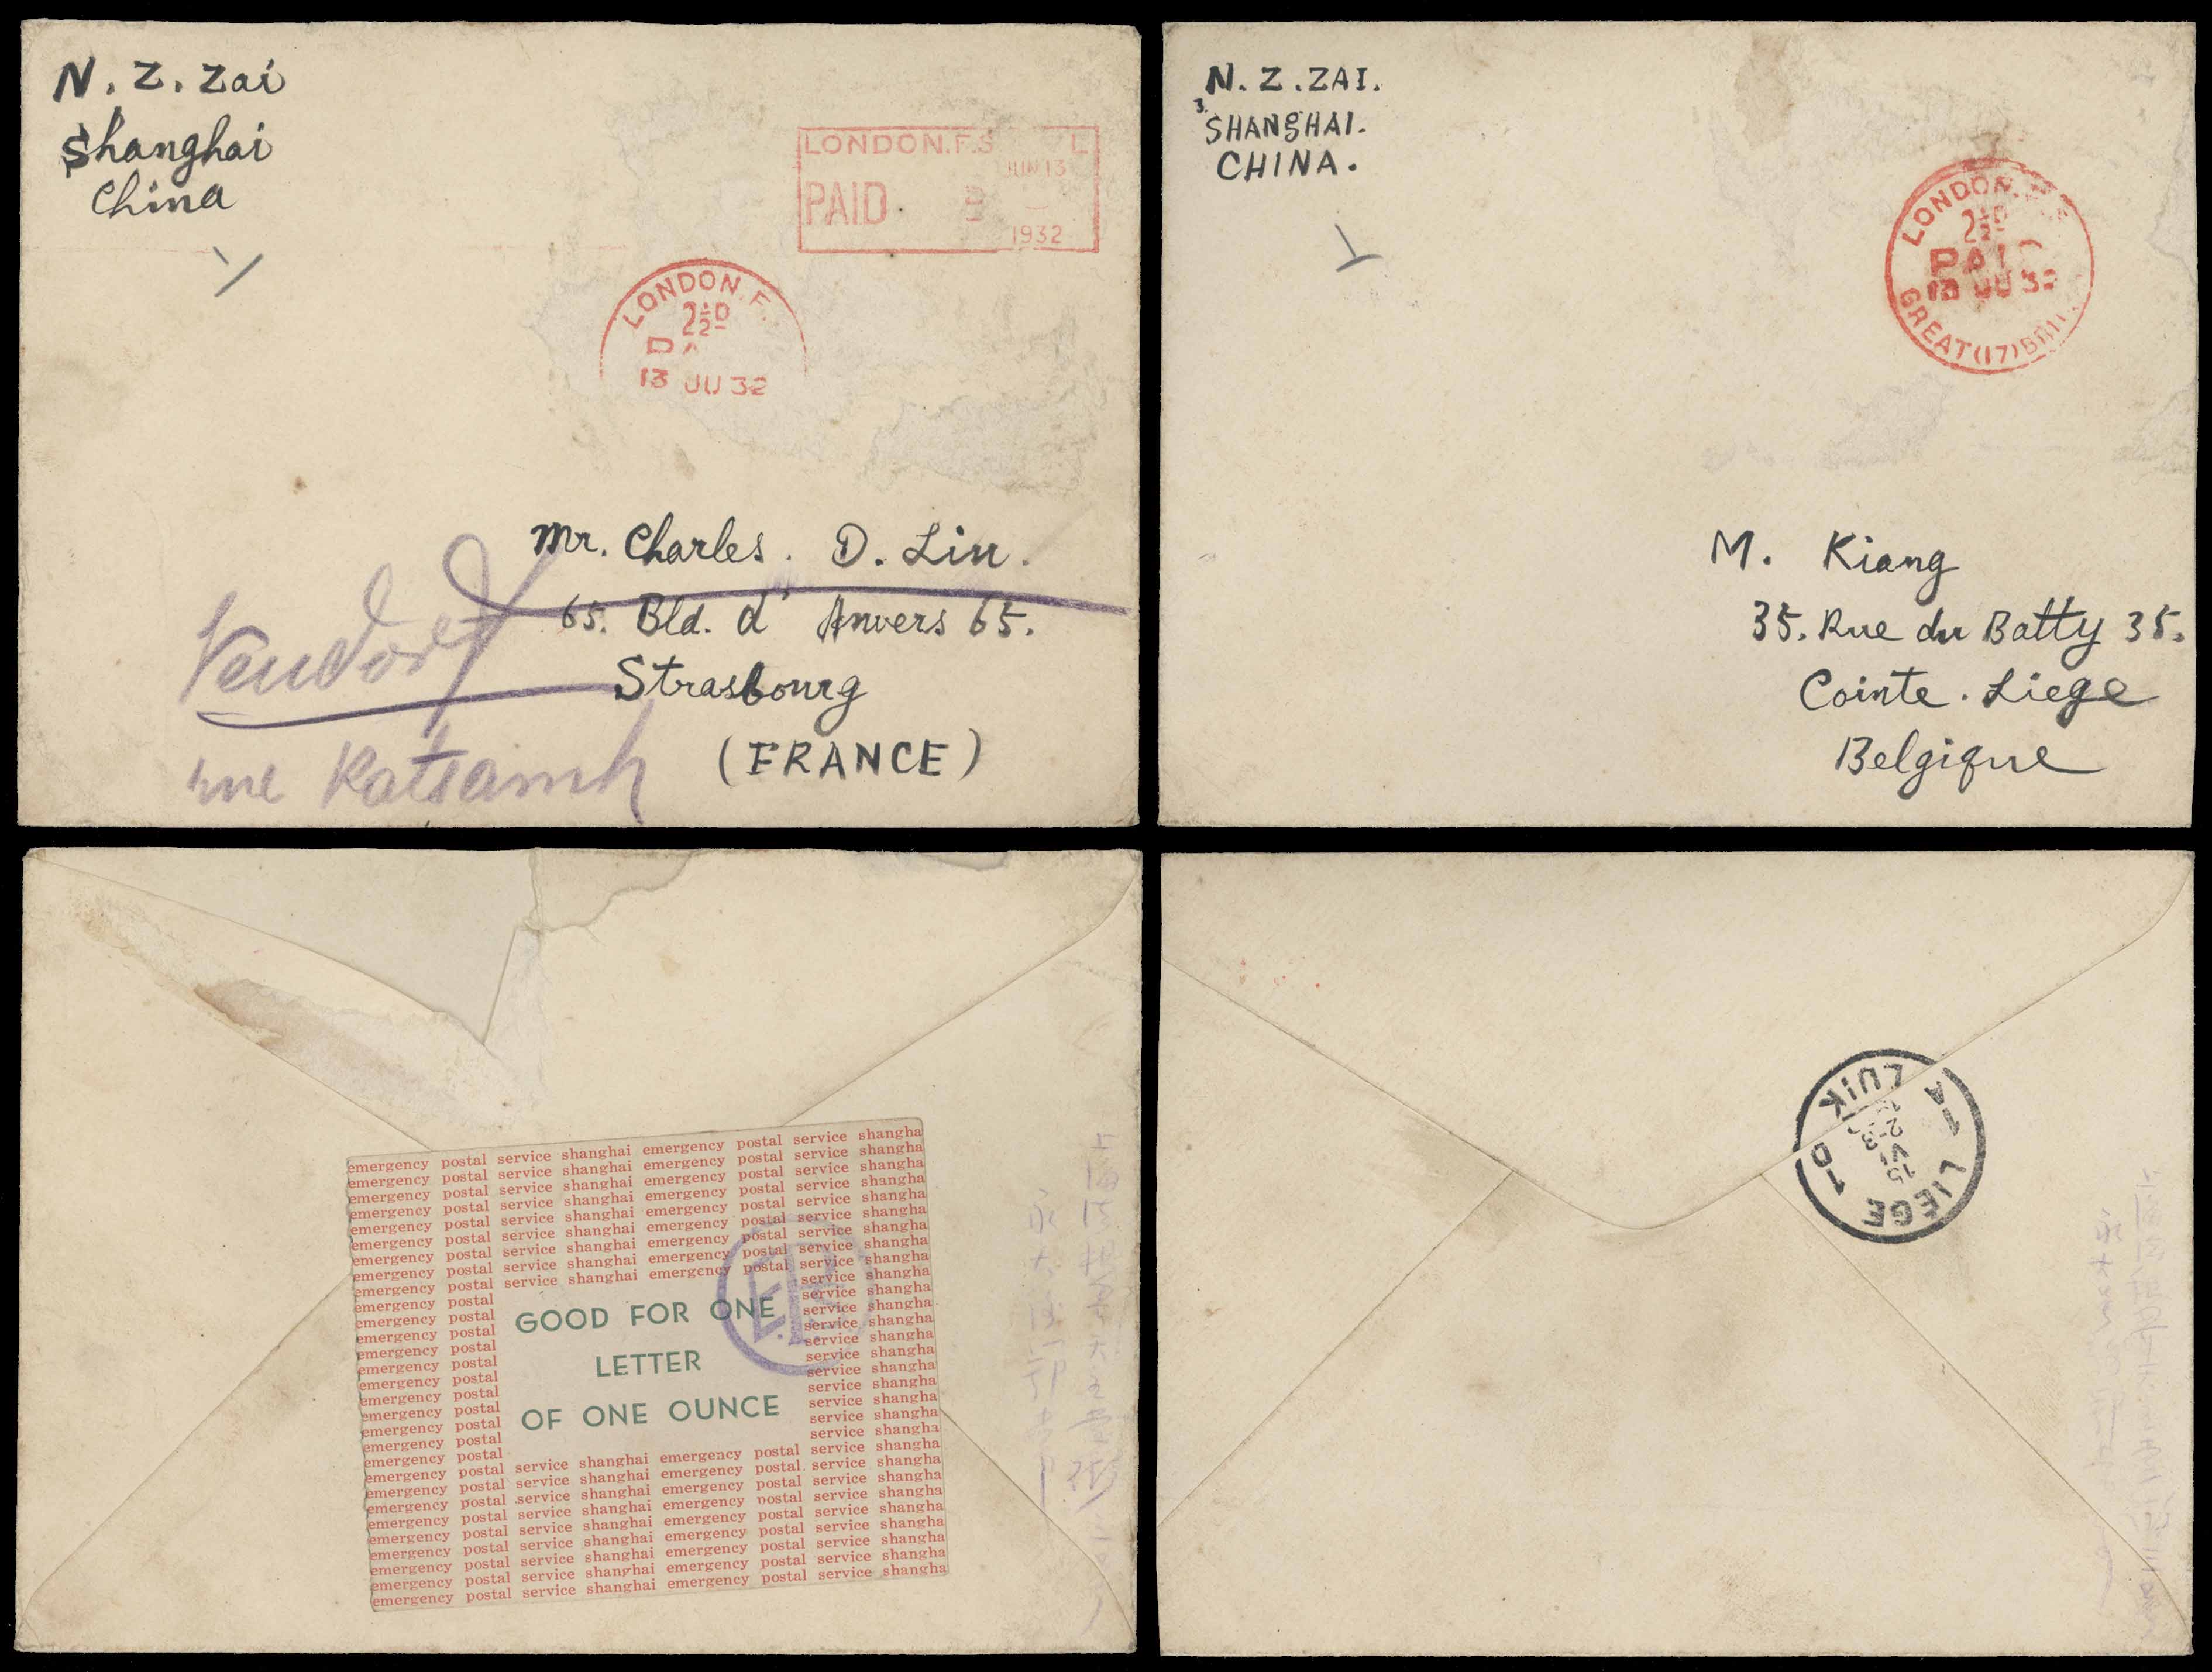 Shanghai Emergency Postal Service 1932 - the Scouting ...